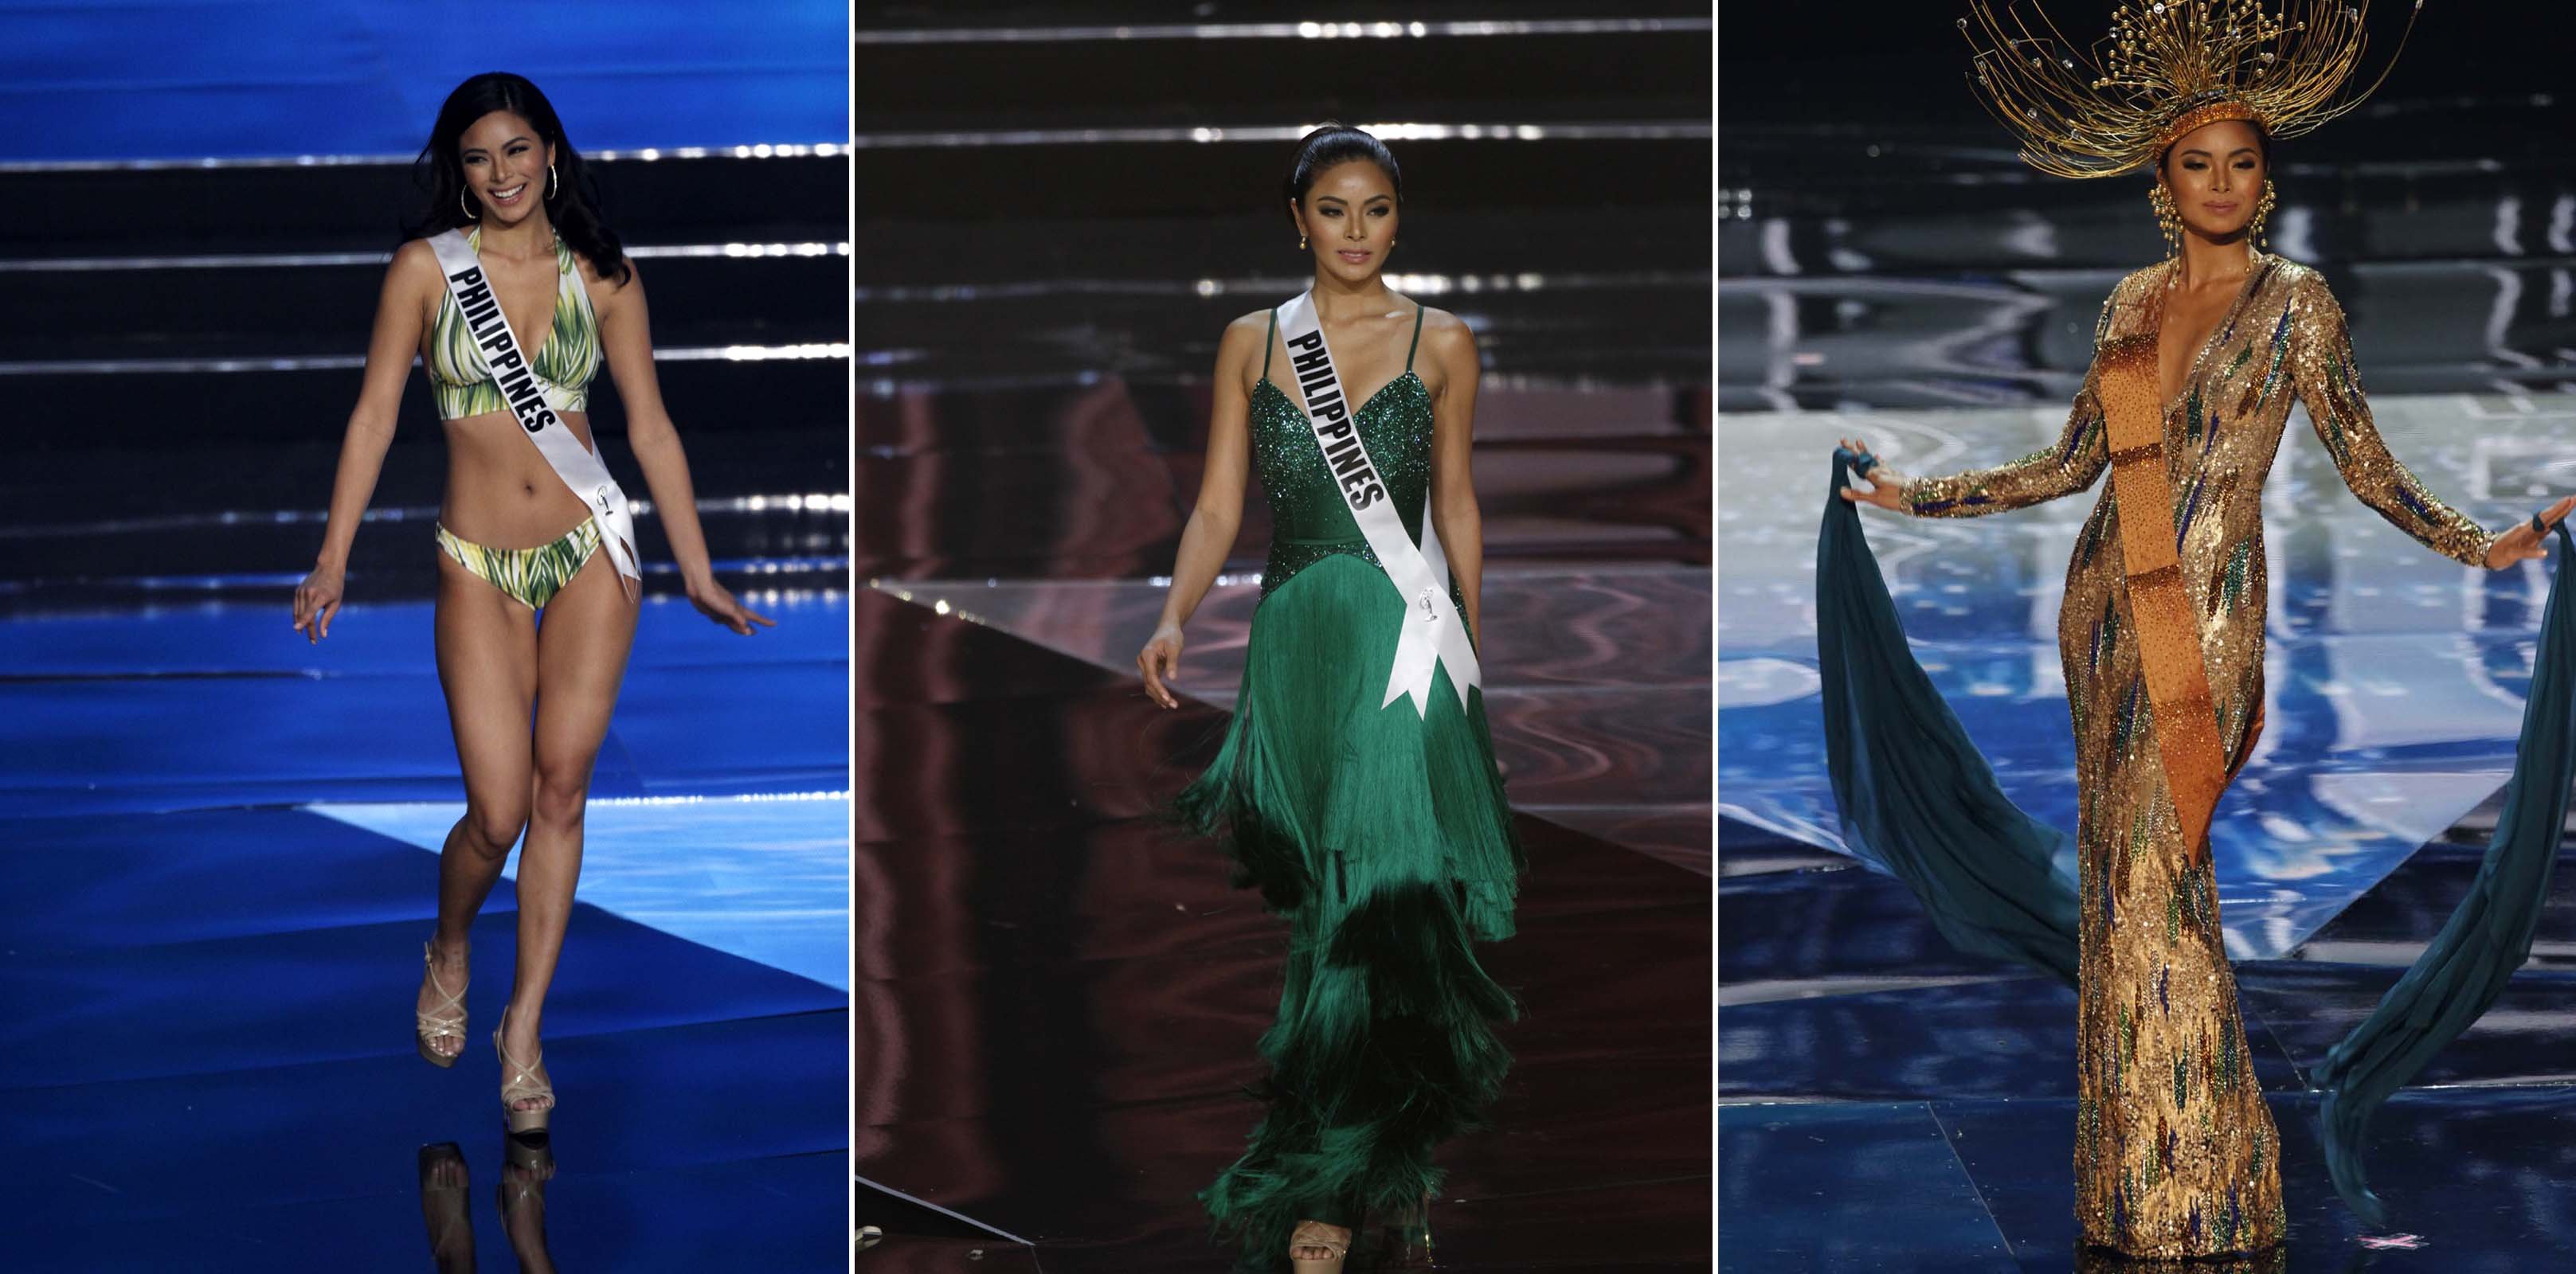 Philippines Miss Universe candidate in swimsuit and national costume